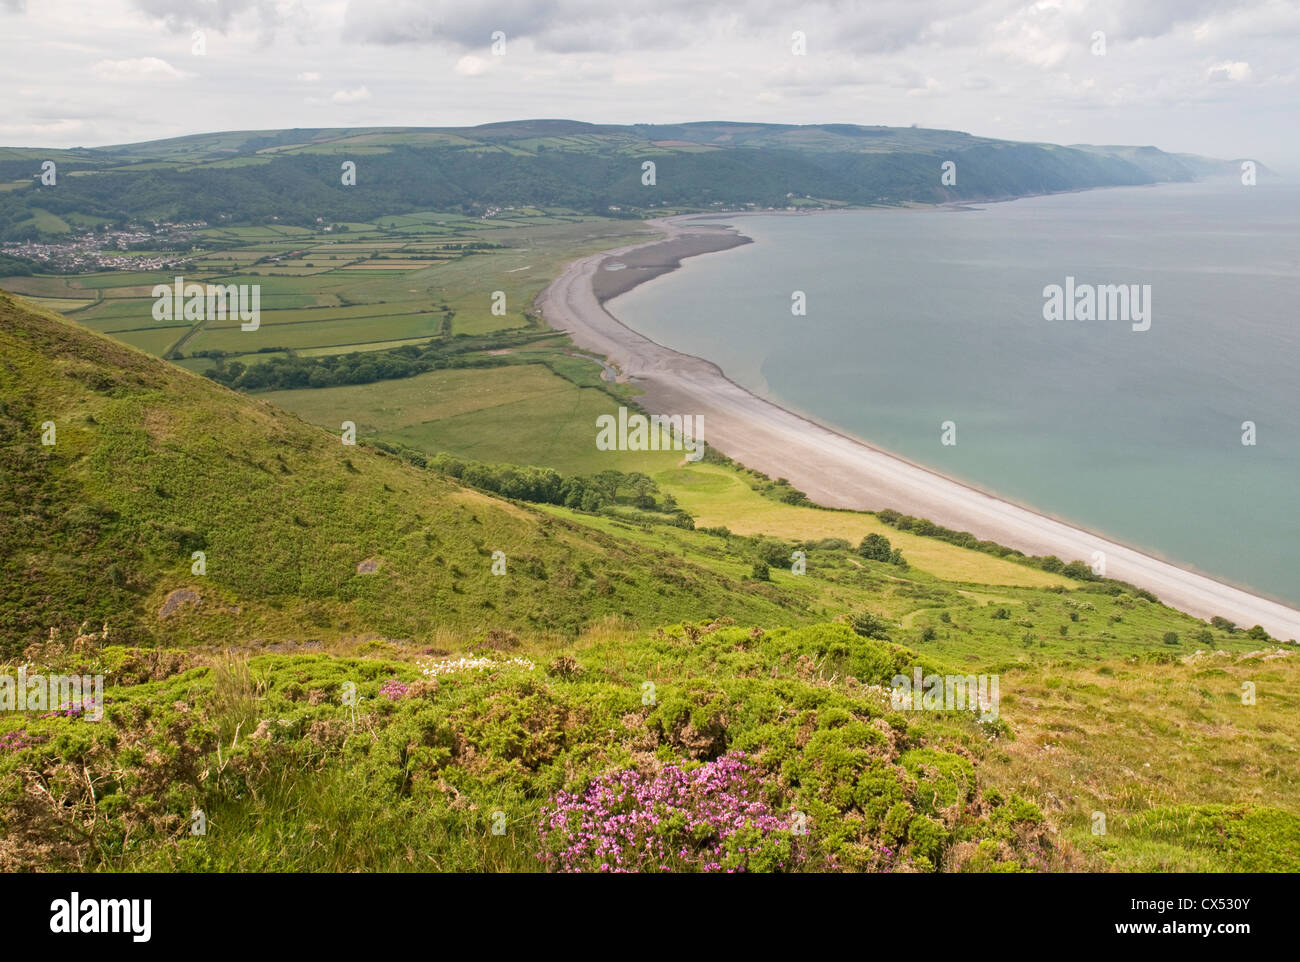 The wide sweep of Porlock Bay on the Bristol Channel coast of Somerset, looking west Stock Photo